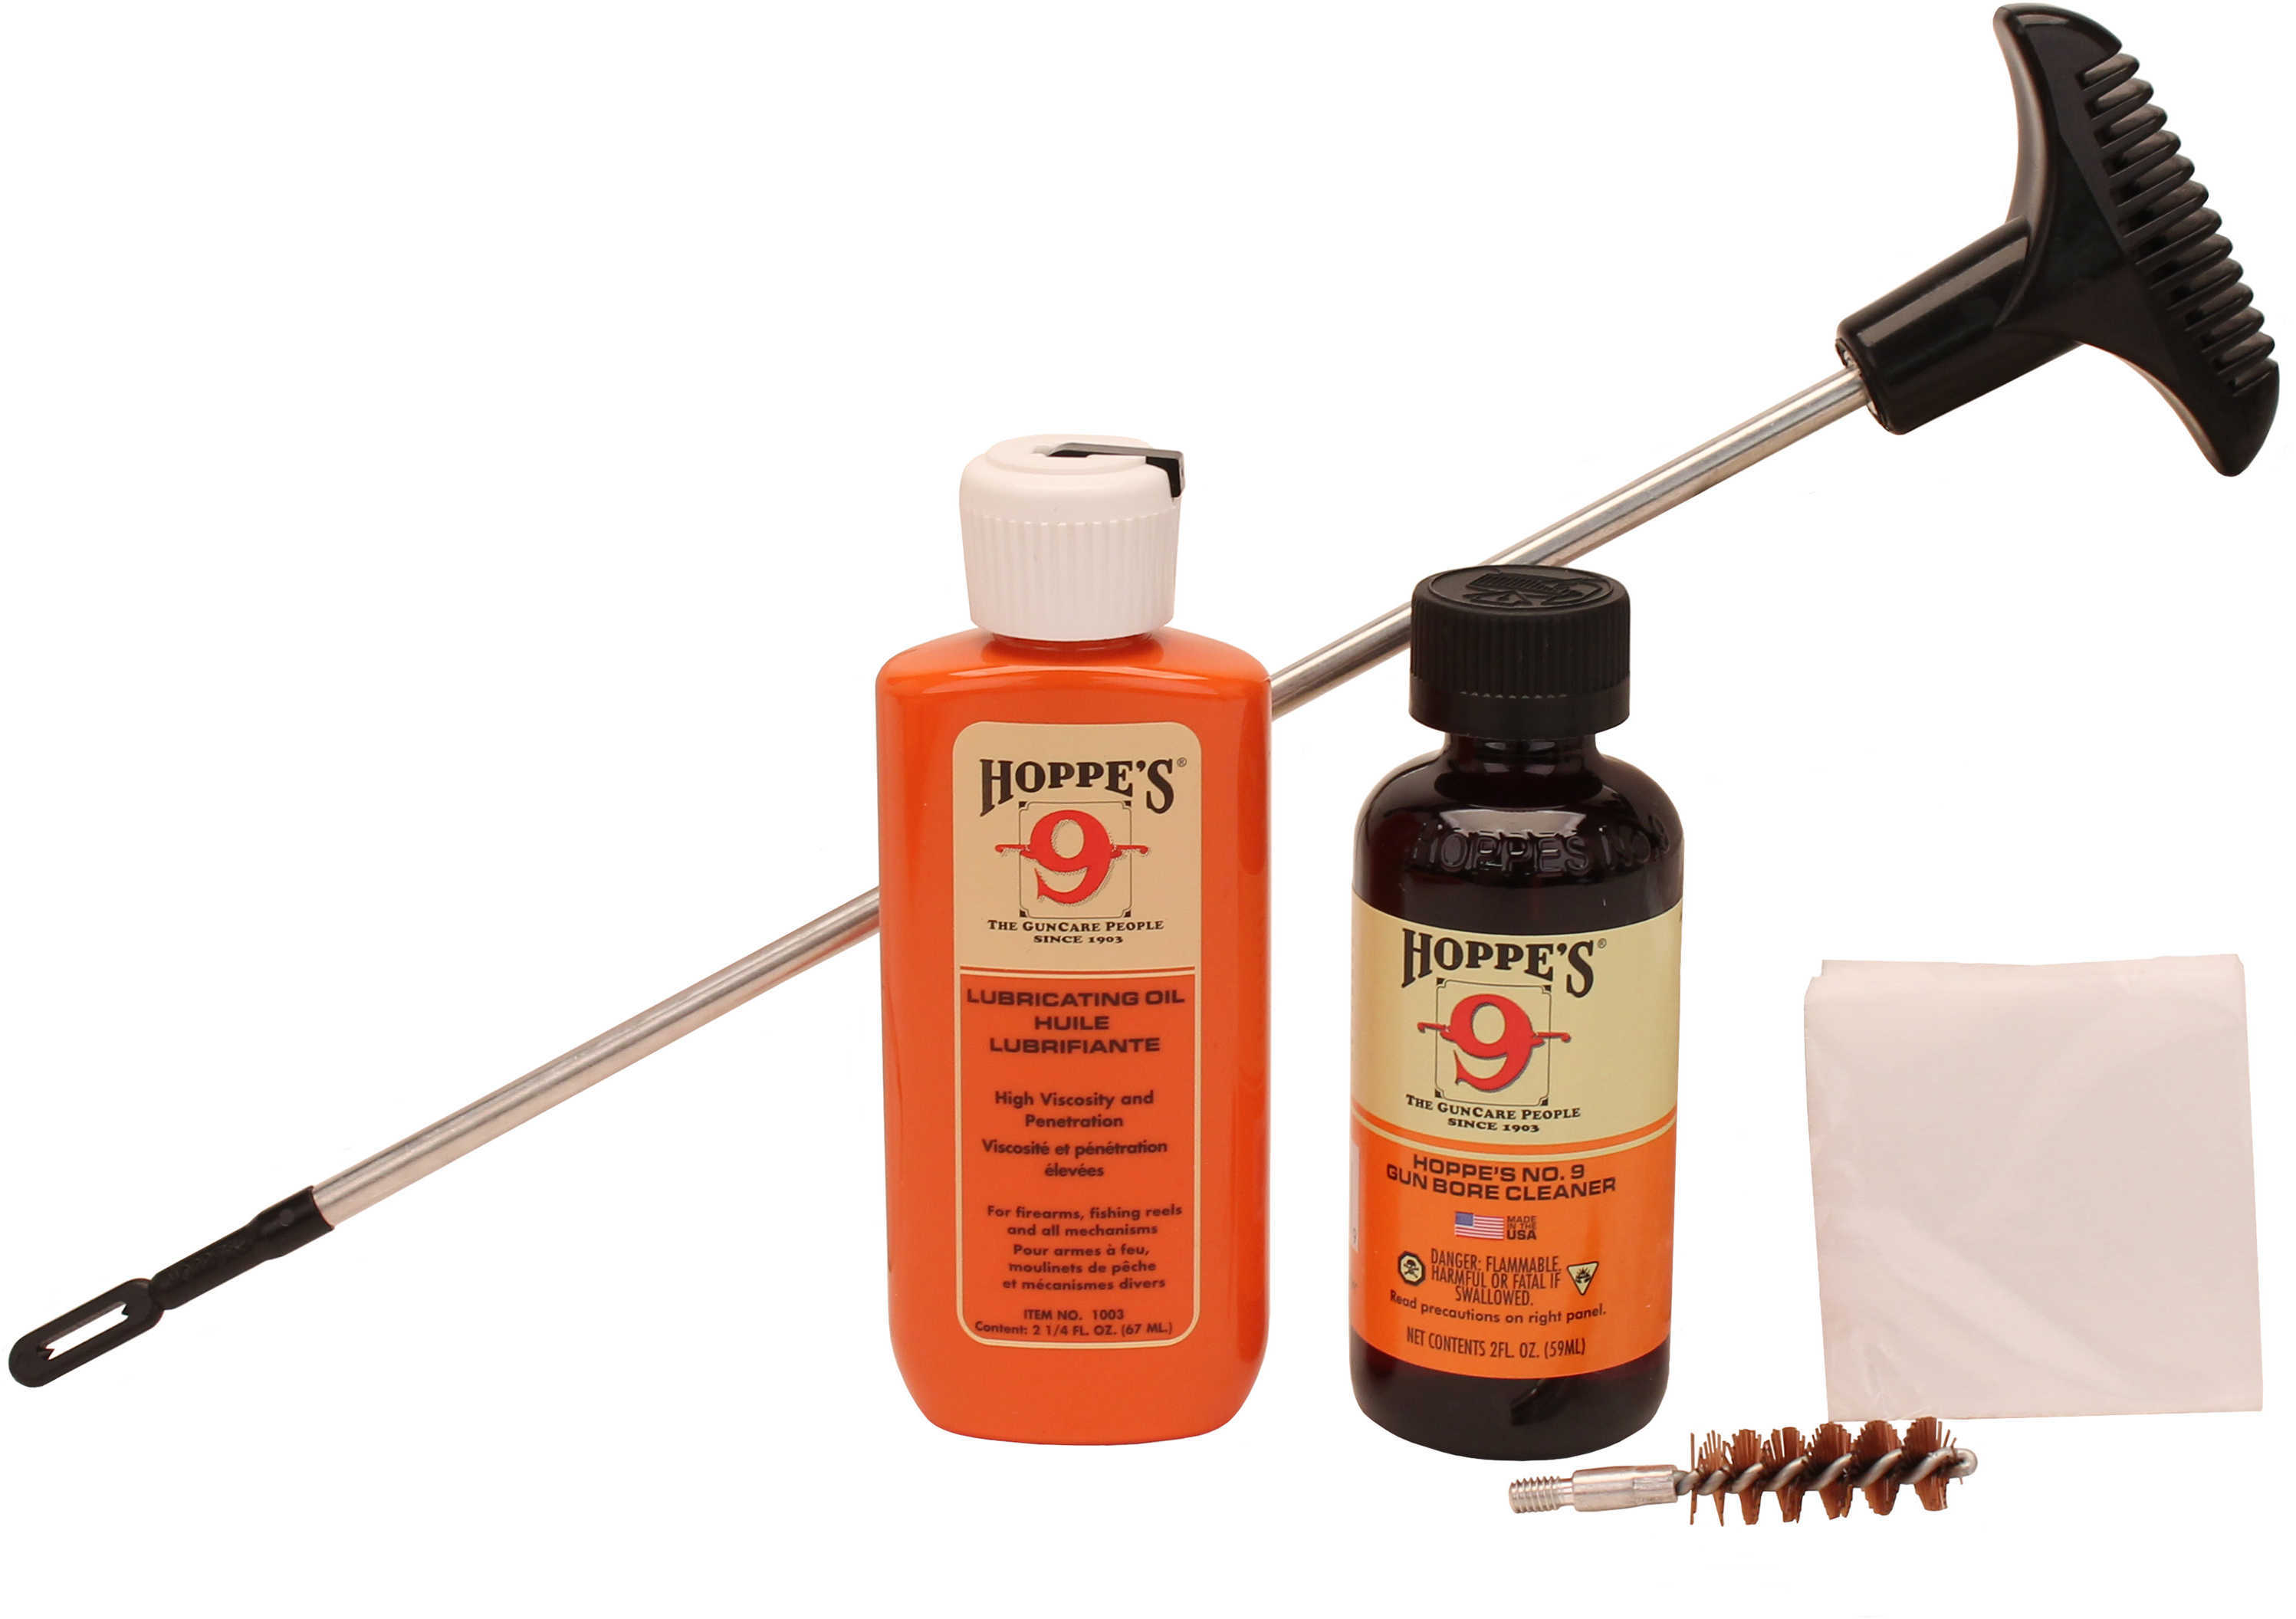 Hoppes Pistol Cleaning Kit - Clamshell .40 10mm Contains: 2 Oz No. 9 Solvent 2.25 Lubricating Oil Patches alumin